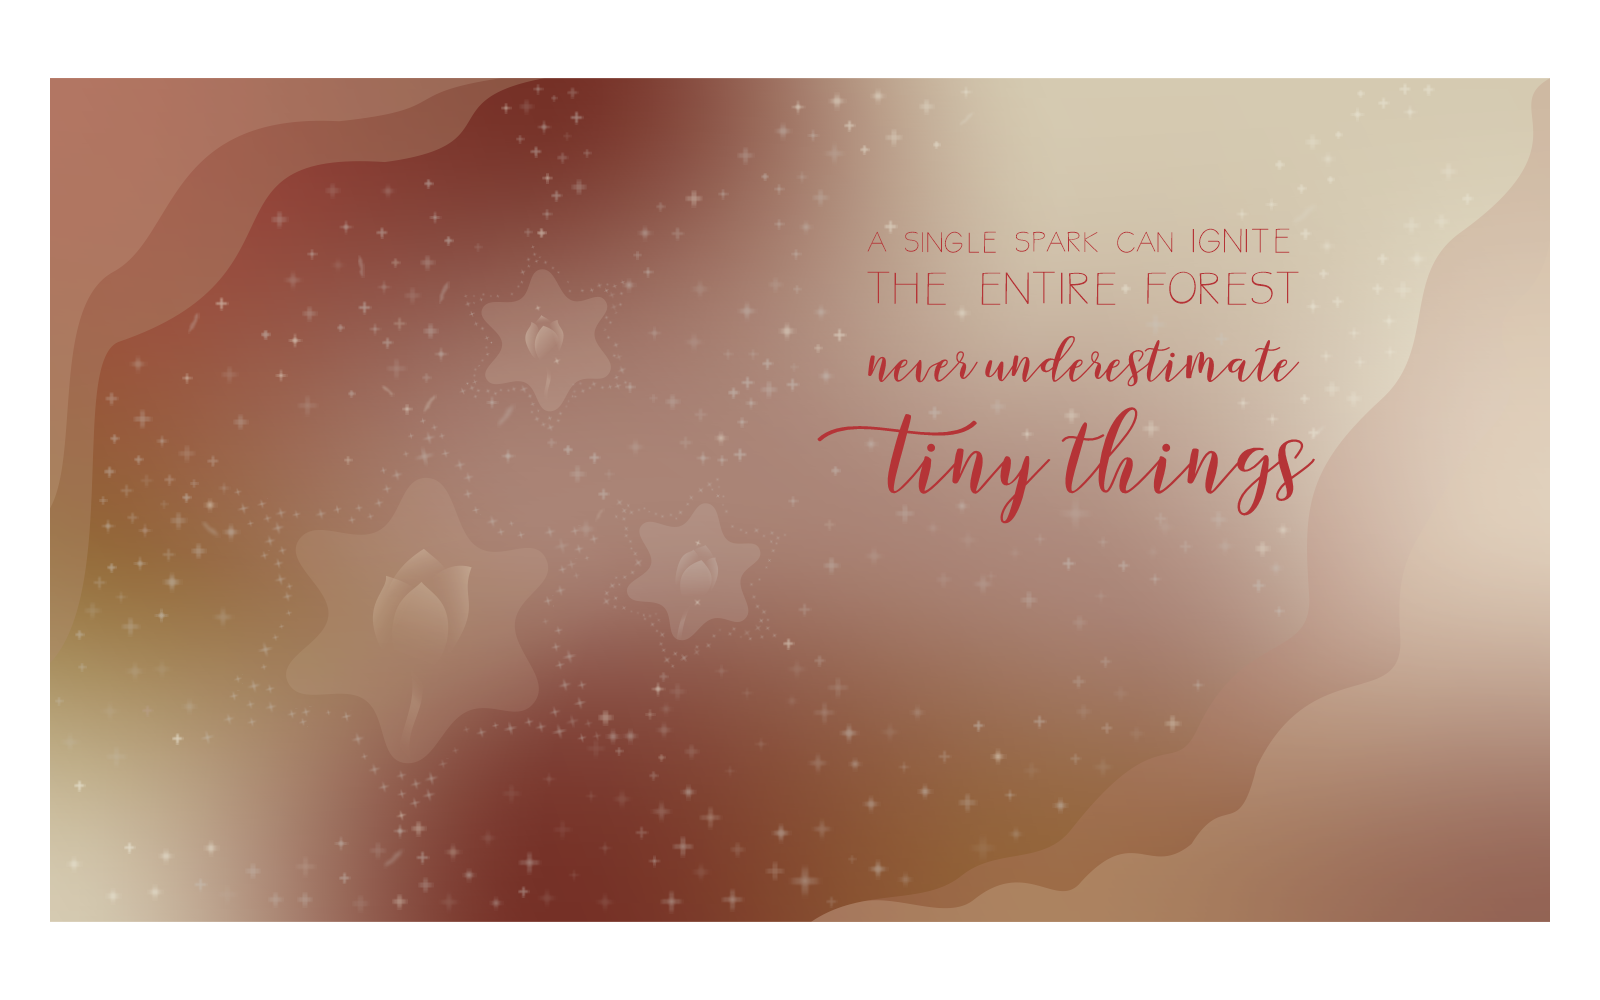 Starry Inspirational Background image 14400x8100px with Message of Power of Tiny Things